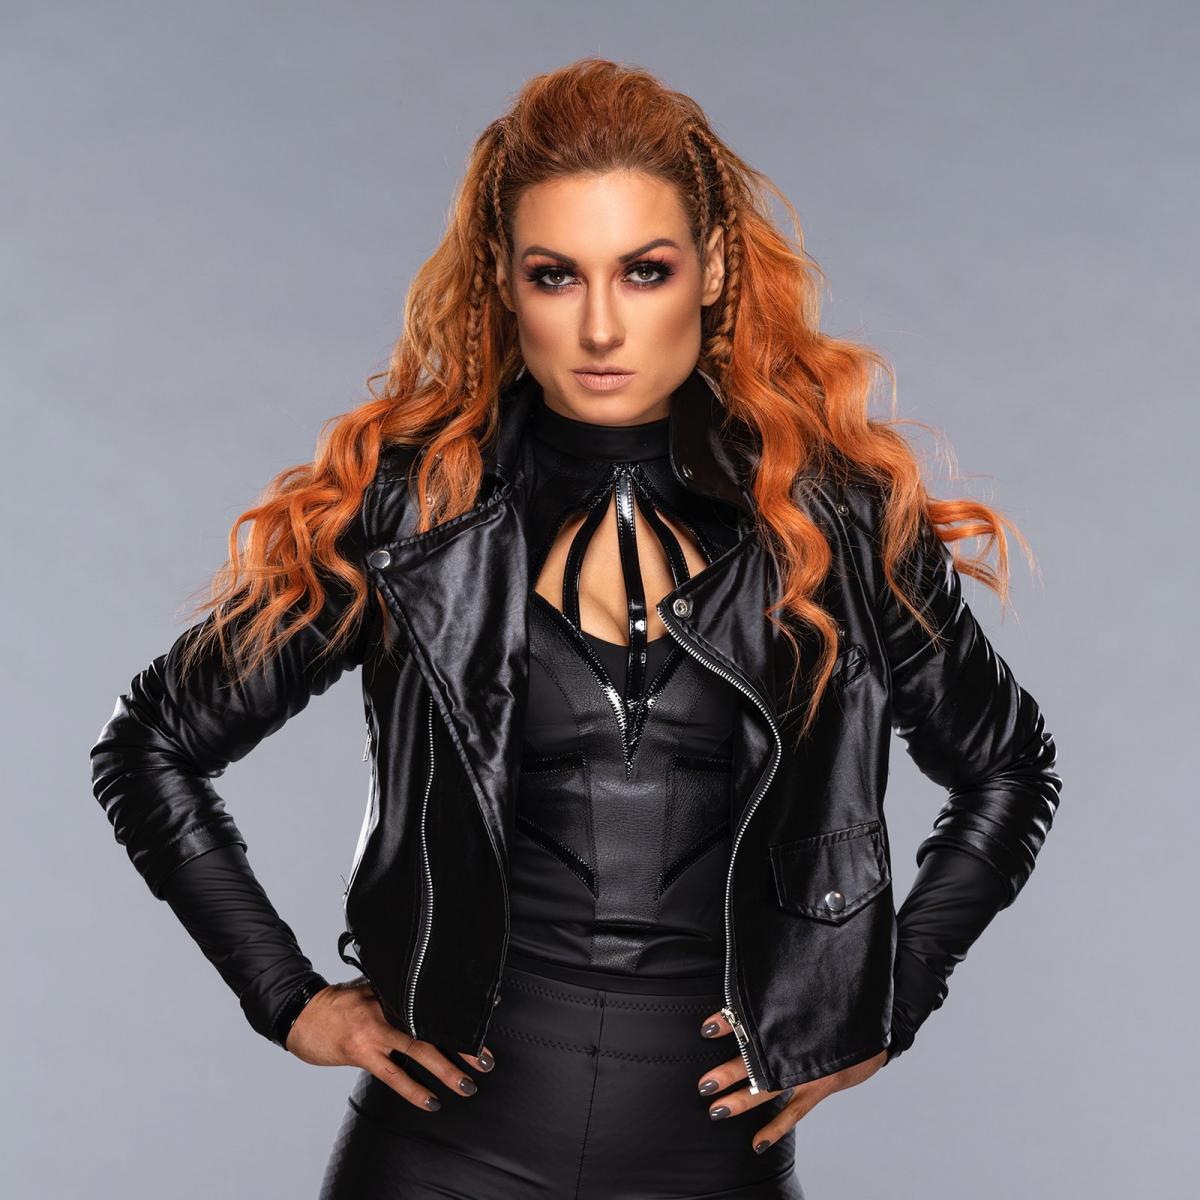 Day 22 of missing Becky Lynch from our screens!